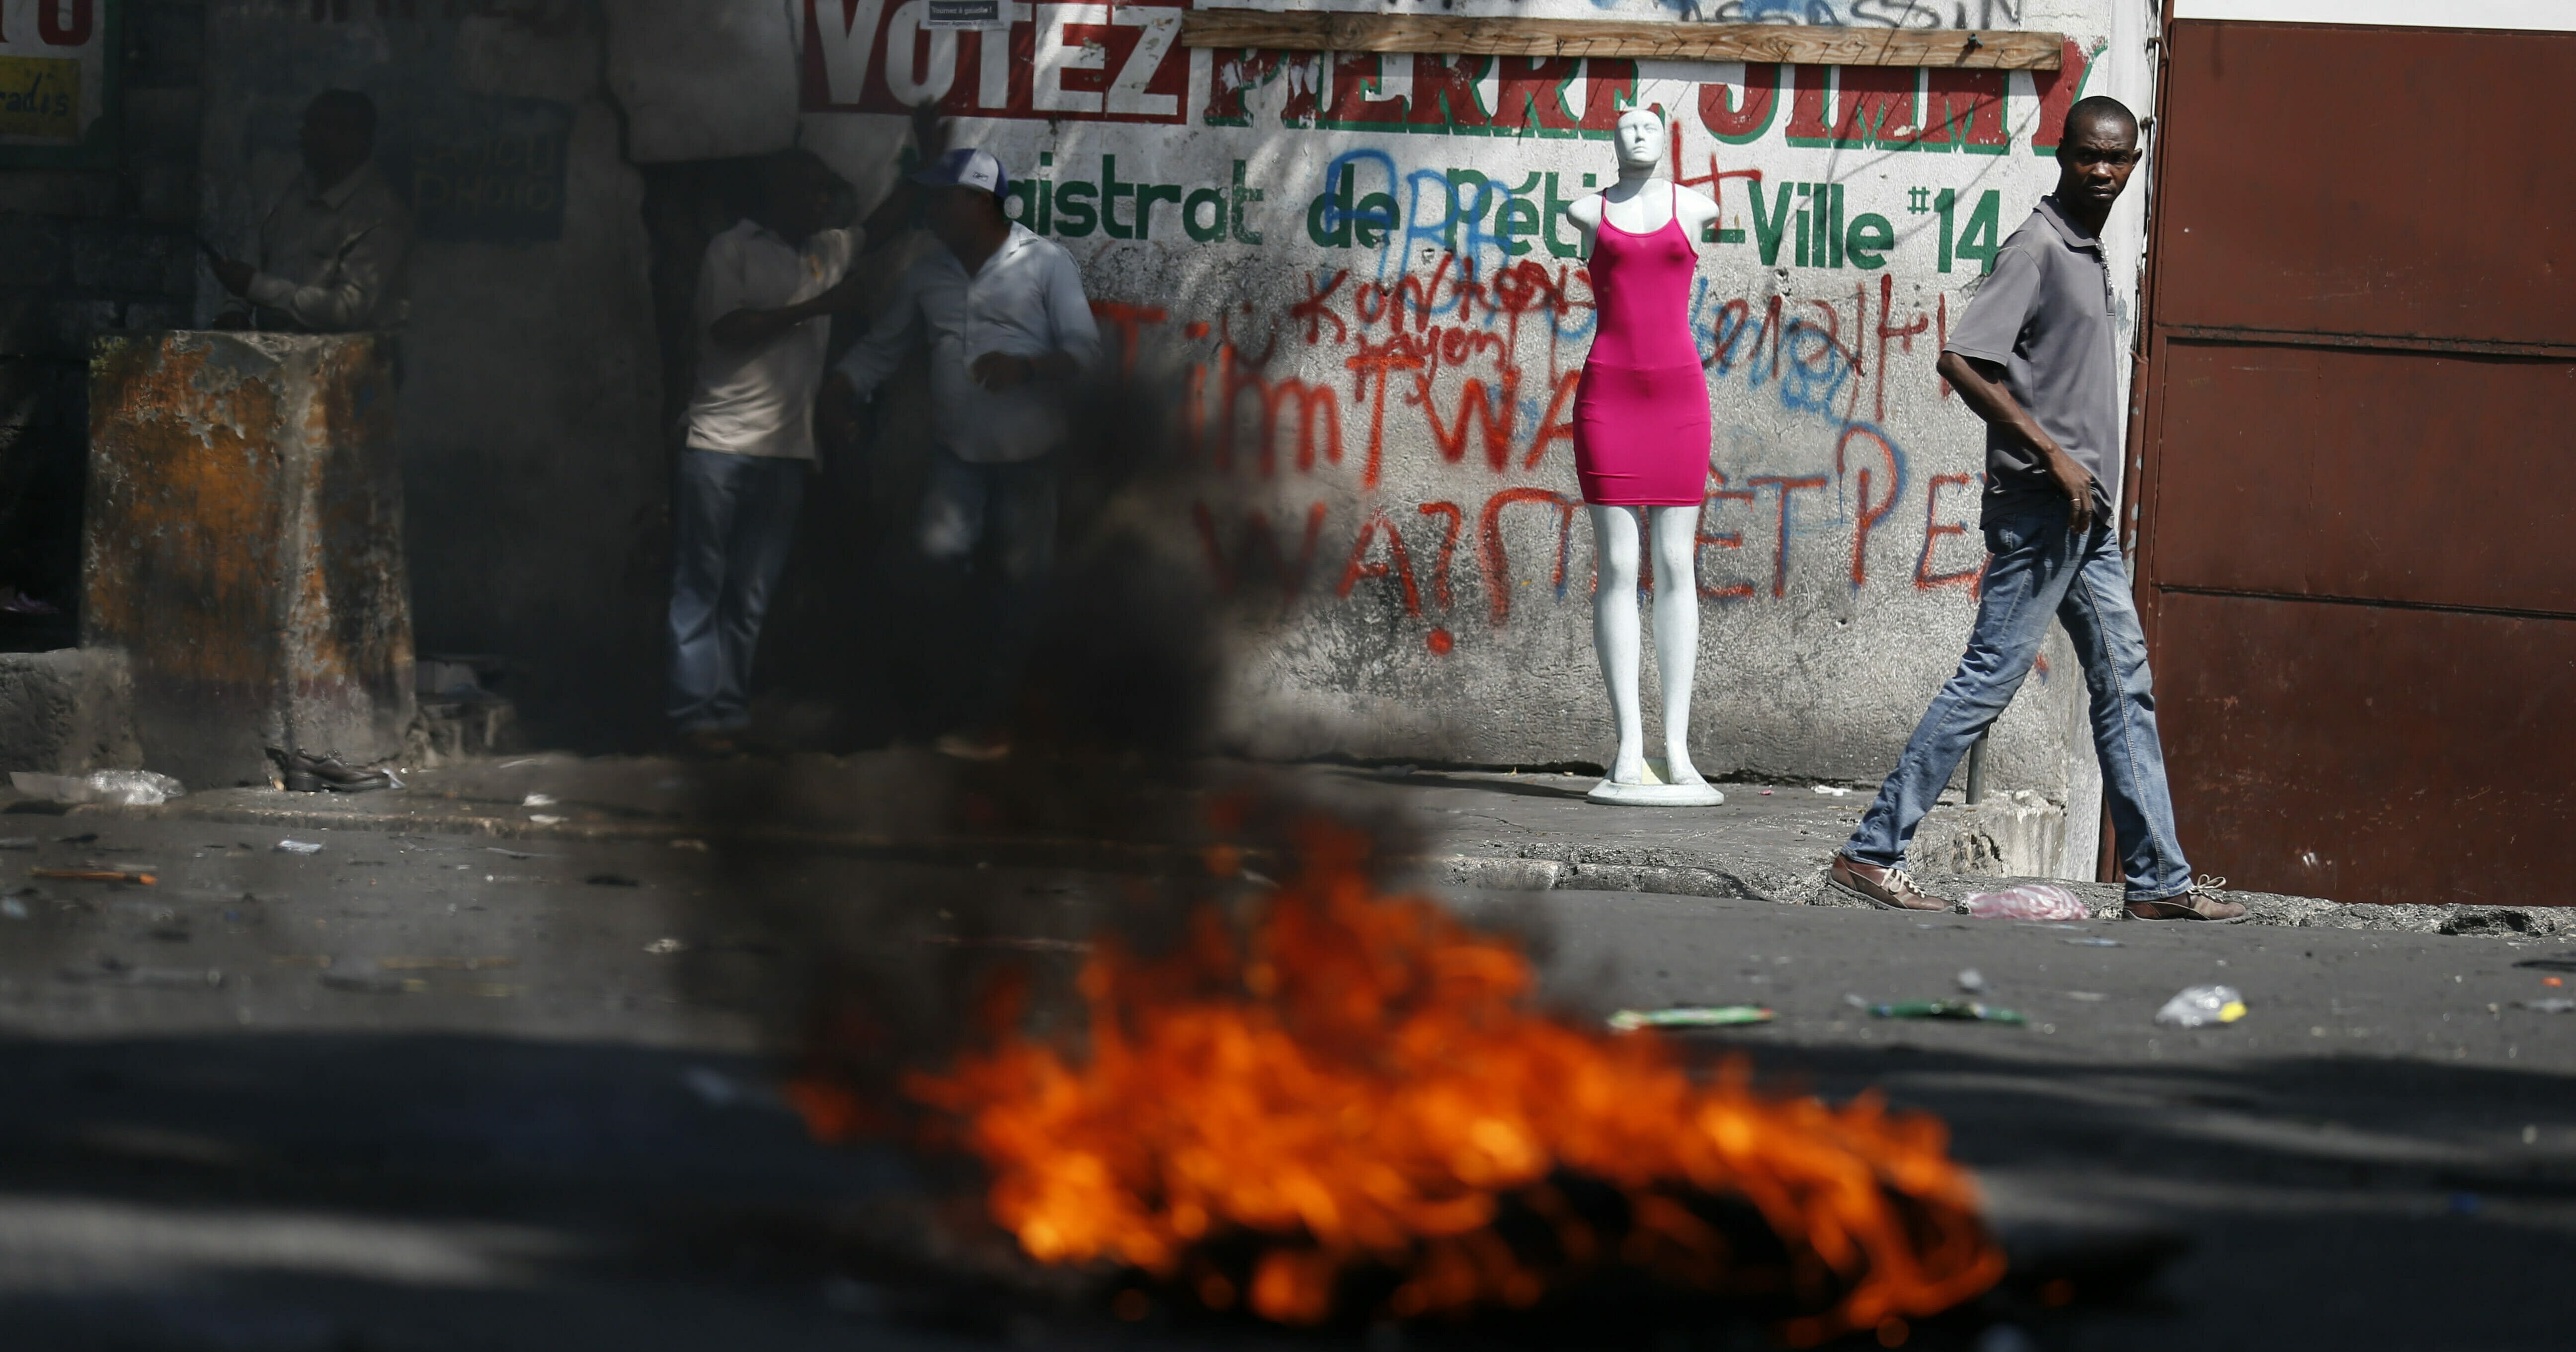 A man walks past a burning barricade during anti-government protests in Port-au-Prince, Haiti, on, Oct. 11, 2019.